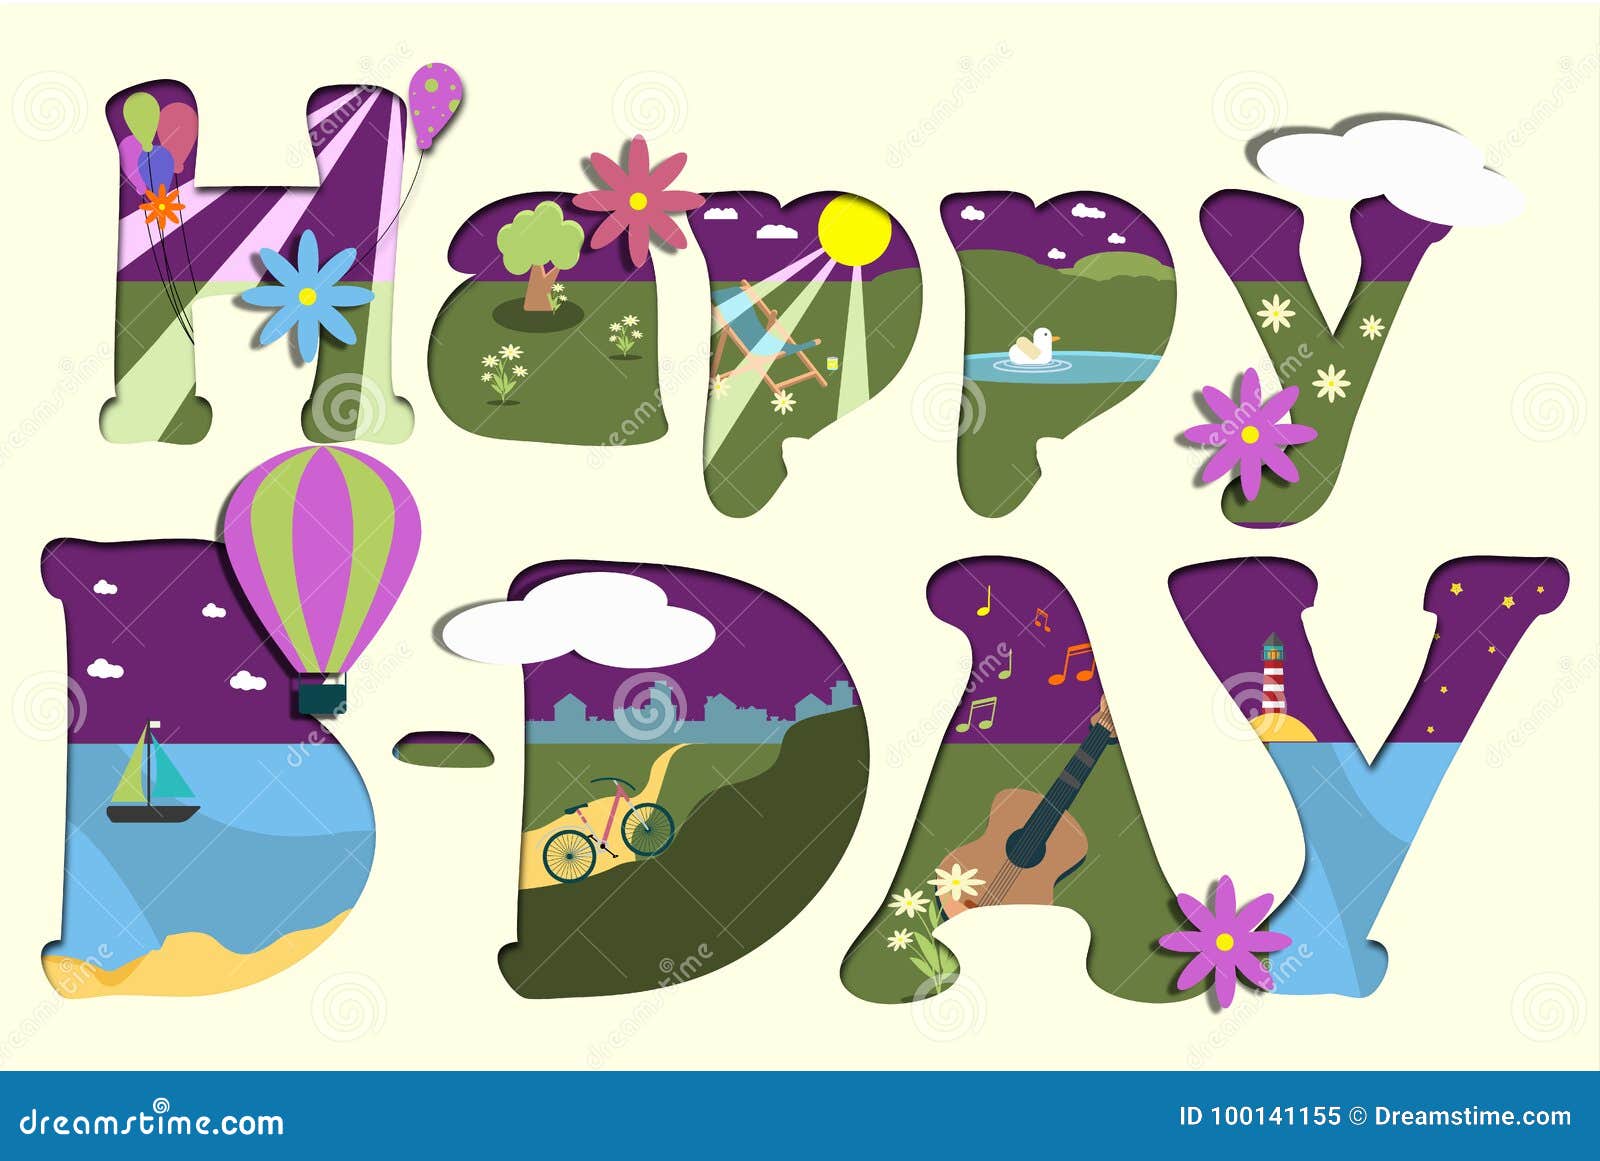 Colorful Happy Birthday Card Theme Stock Vector - Illustration of ...